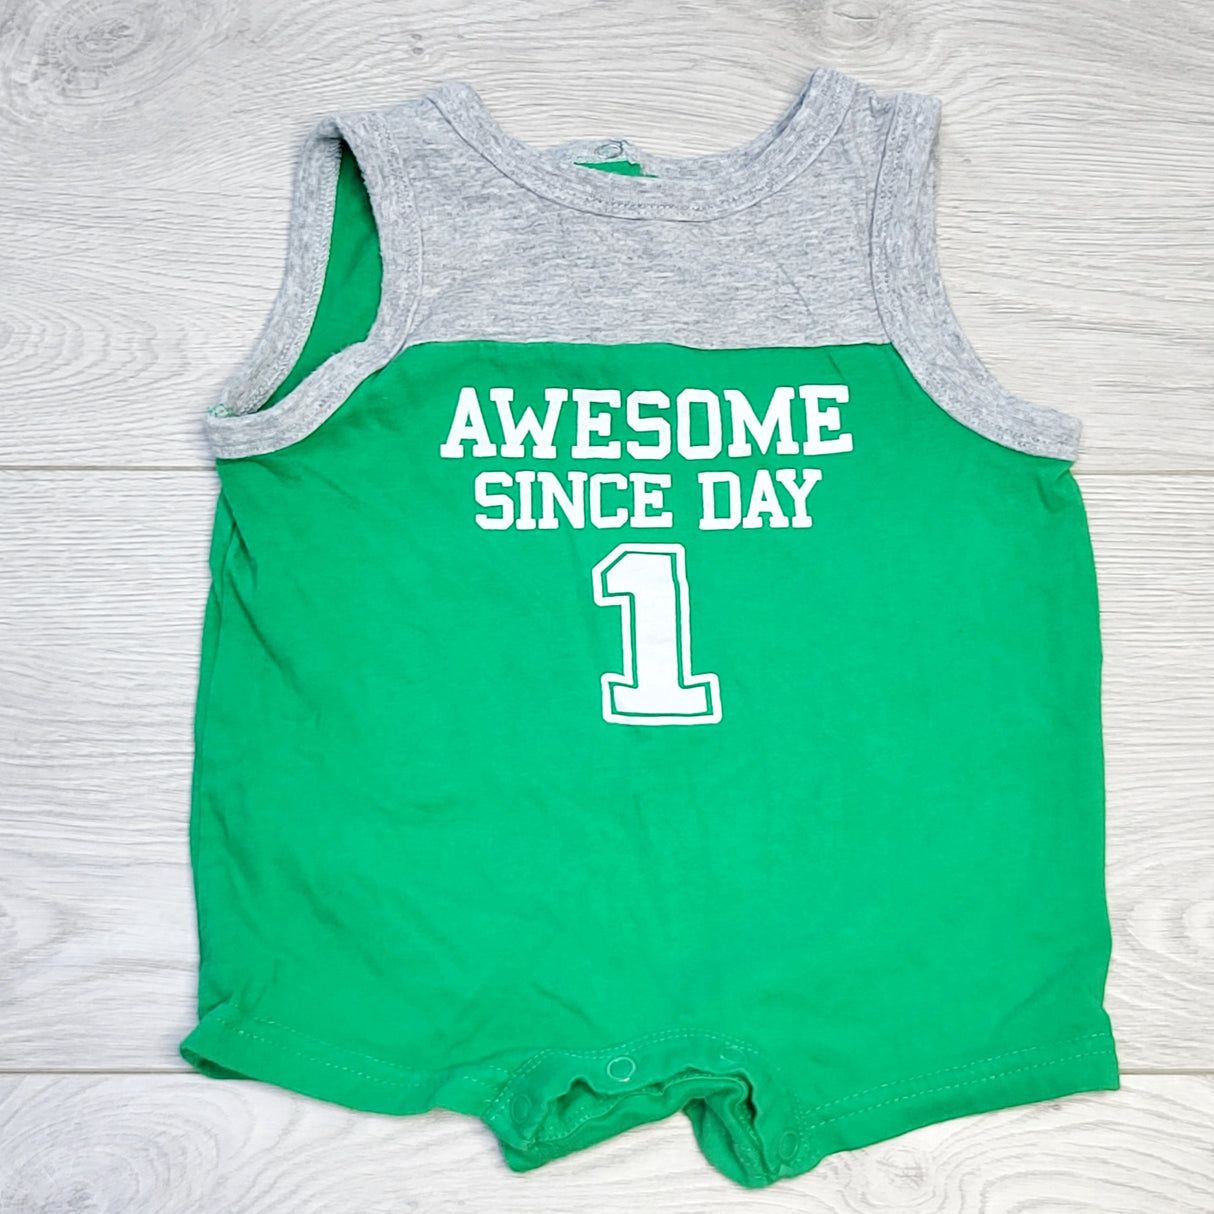 CHOL1 - George grey and green "Awesome Since Day One" romper, size 3-6 months